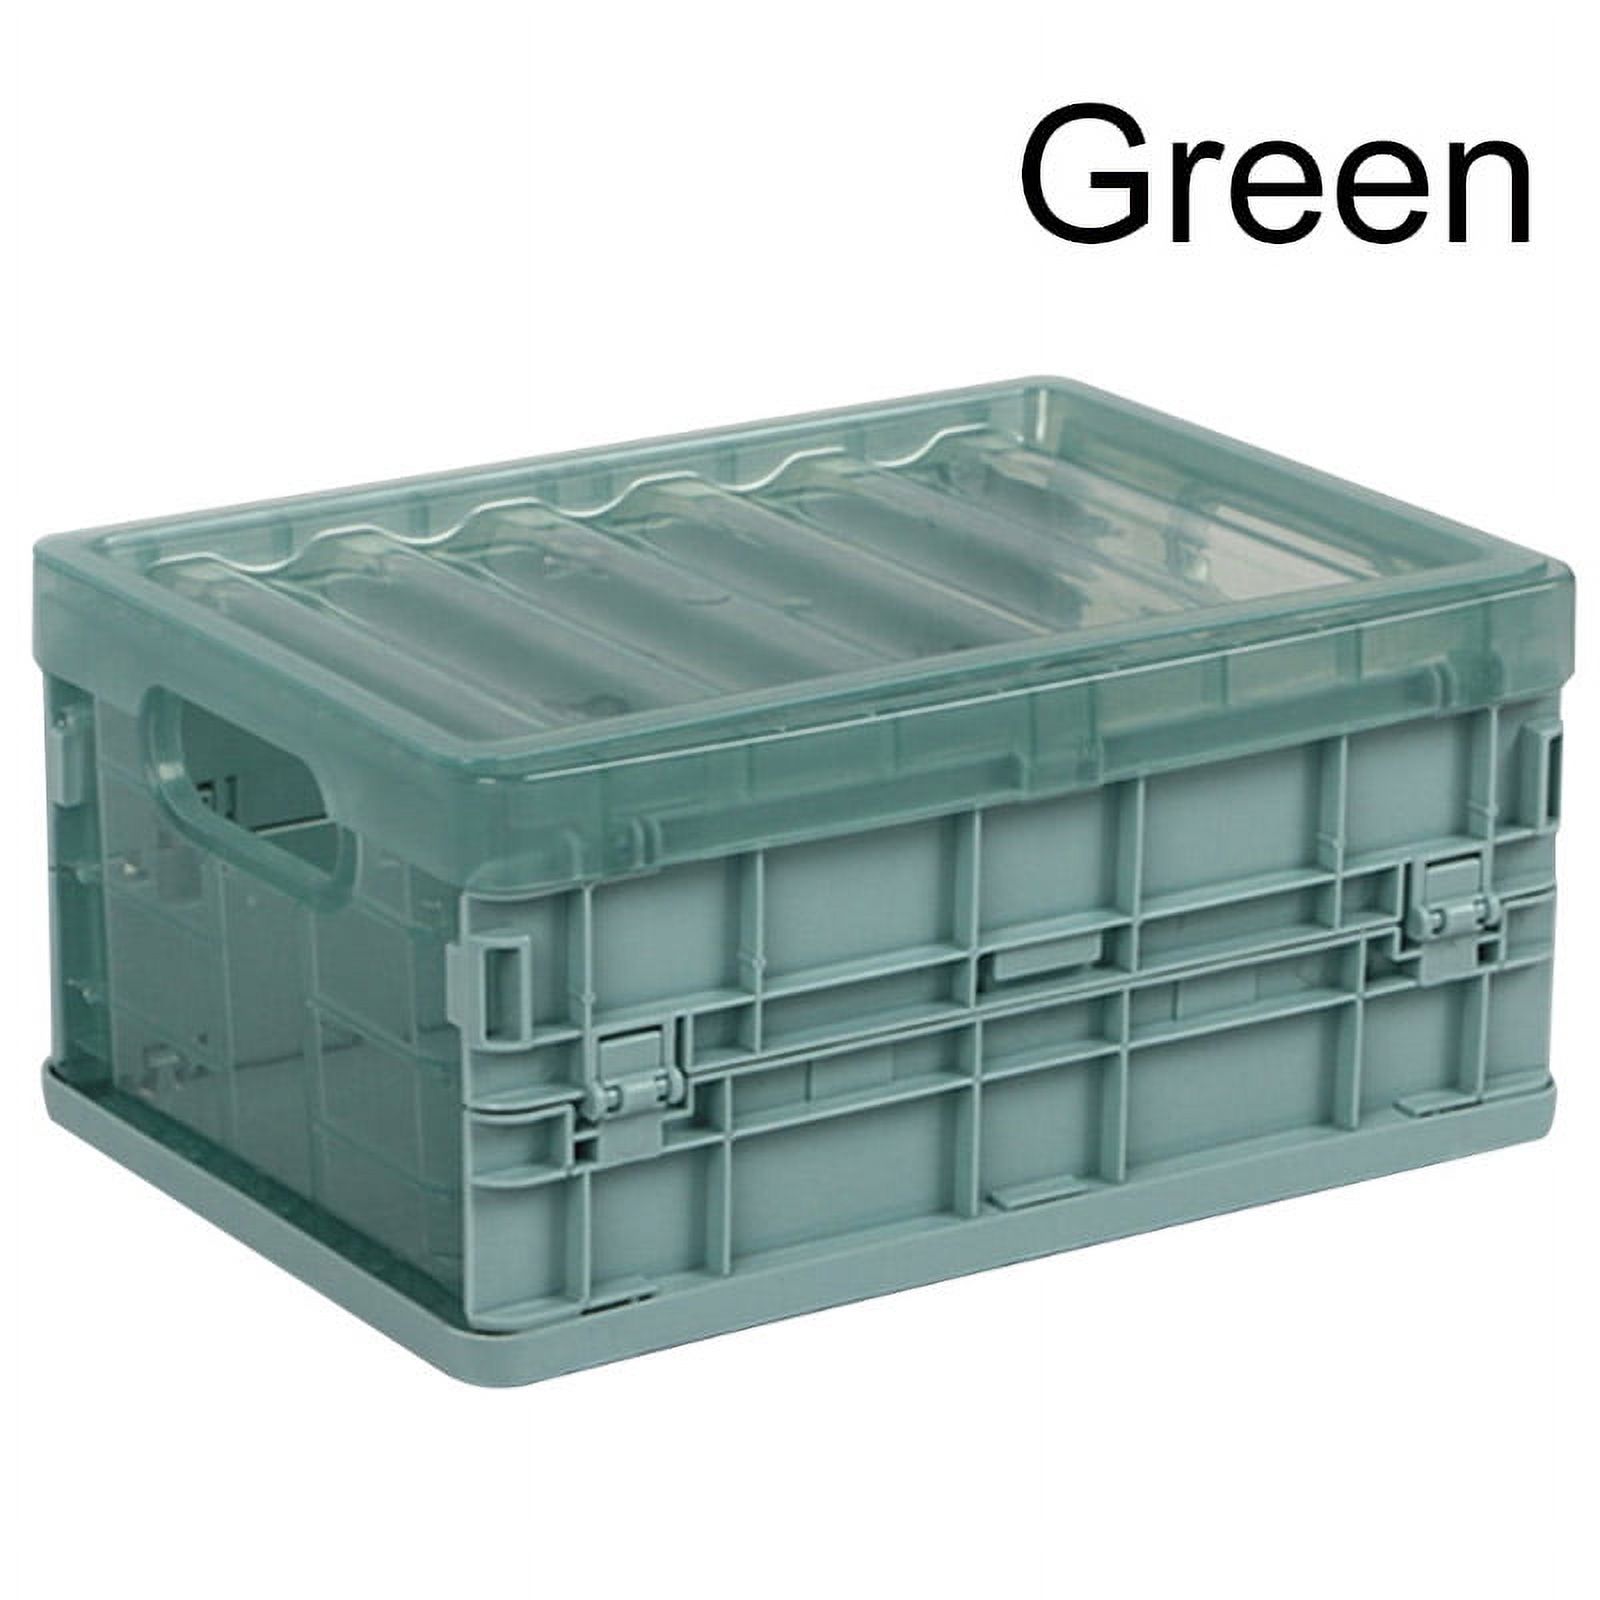 Foldable Plastic Storage Container Basket With Lid, Thickened Student Organizer Box, Simple Plastic Box, Storage Boxes Used for Wardrobe/Clothing/Books - image 3 of 8